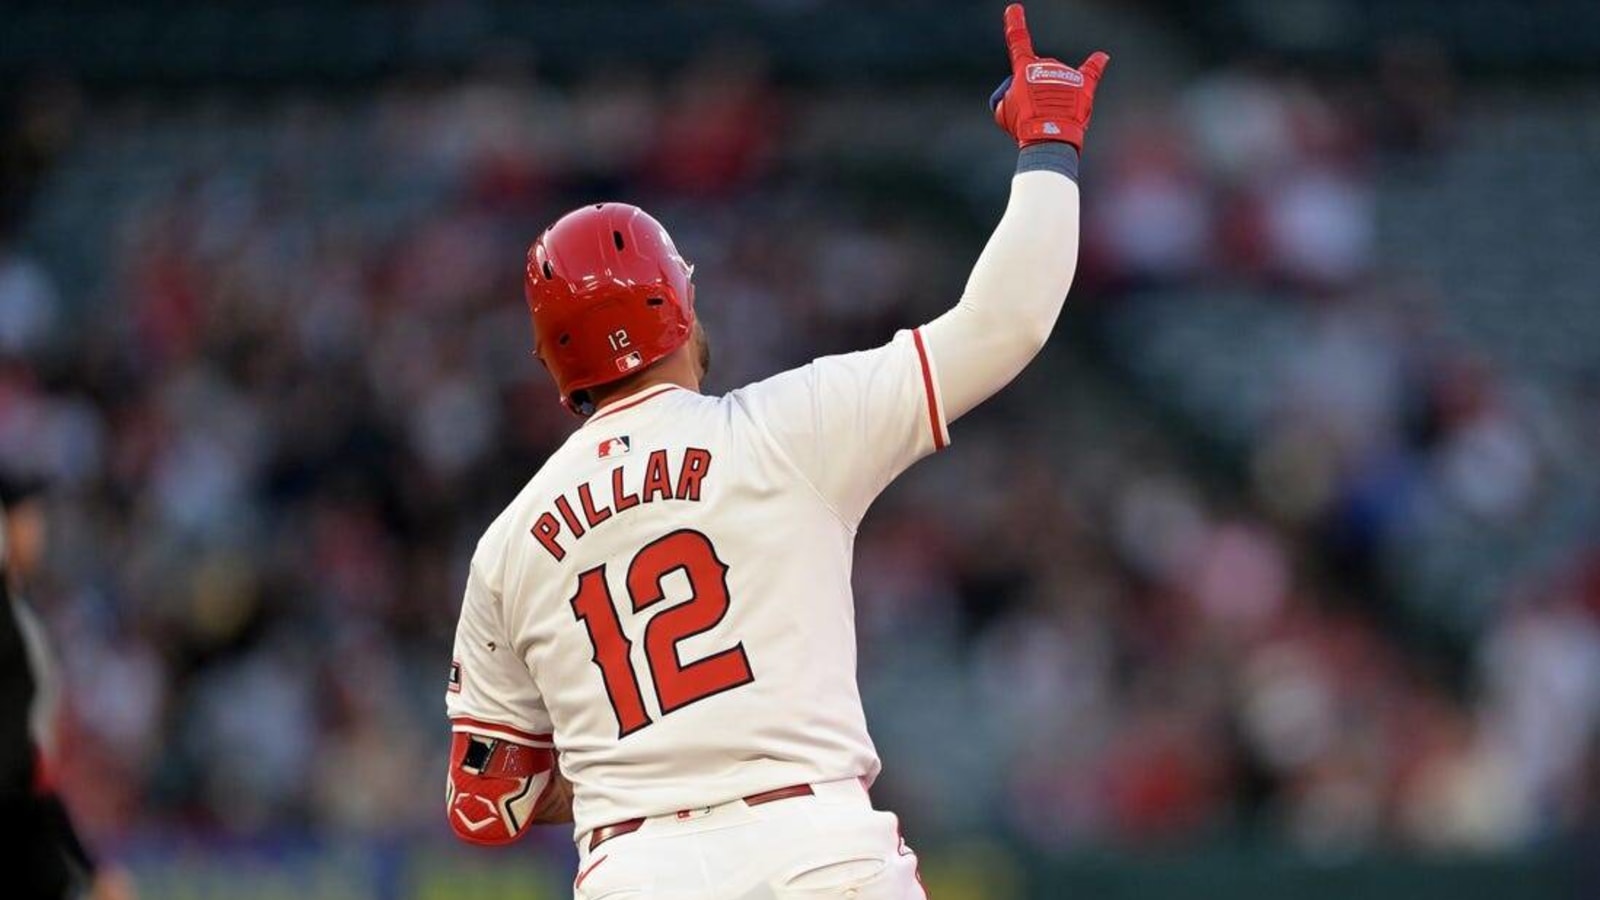 Cardinals score 8 runs in 7th inning to rally past Angels